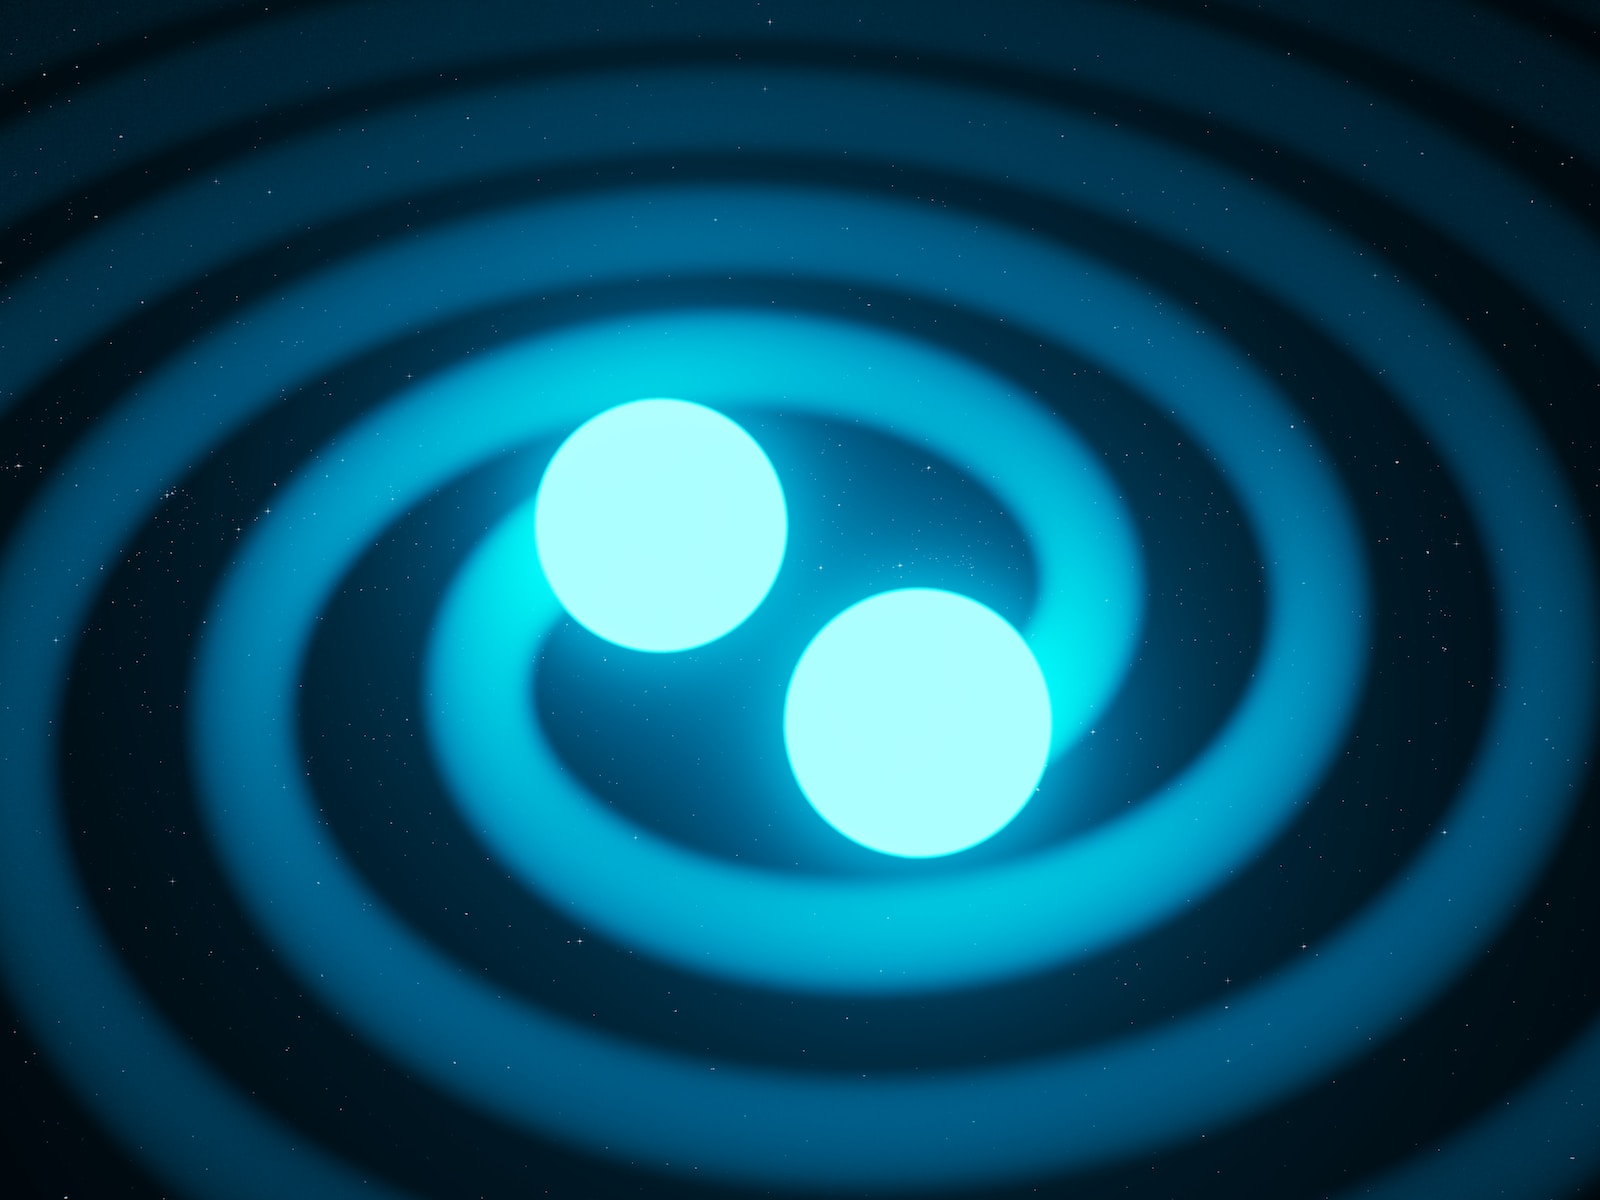 a black and blue swirl with two white circles